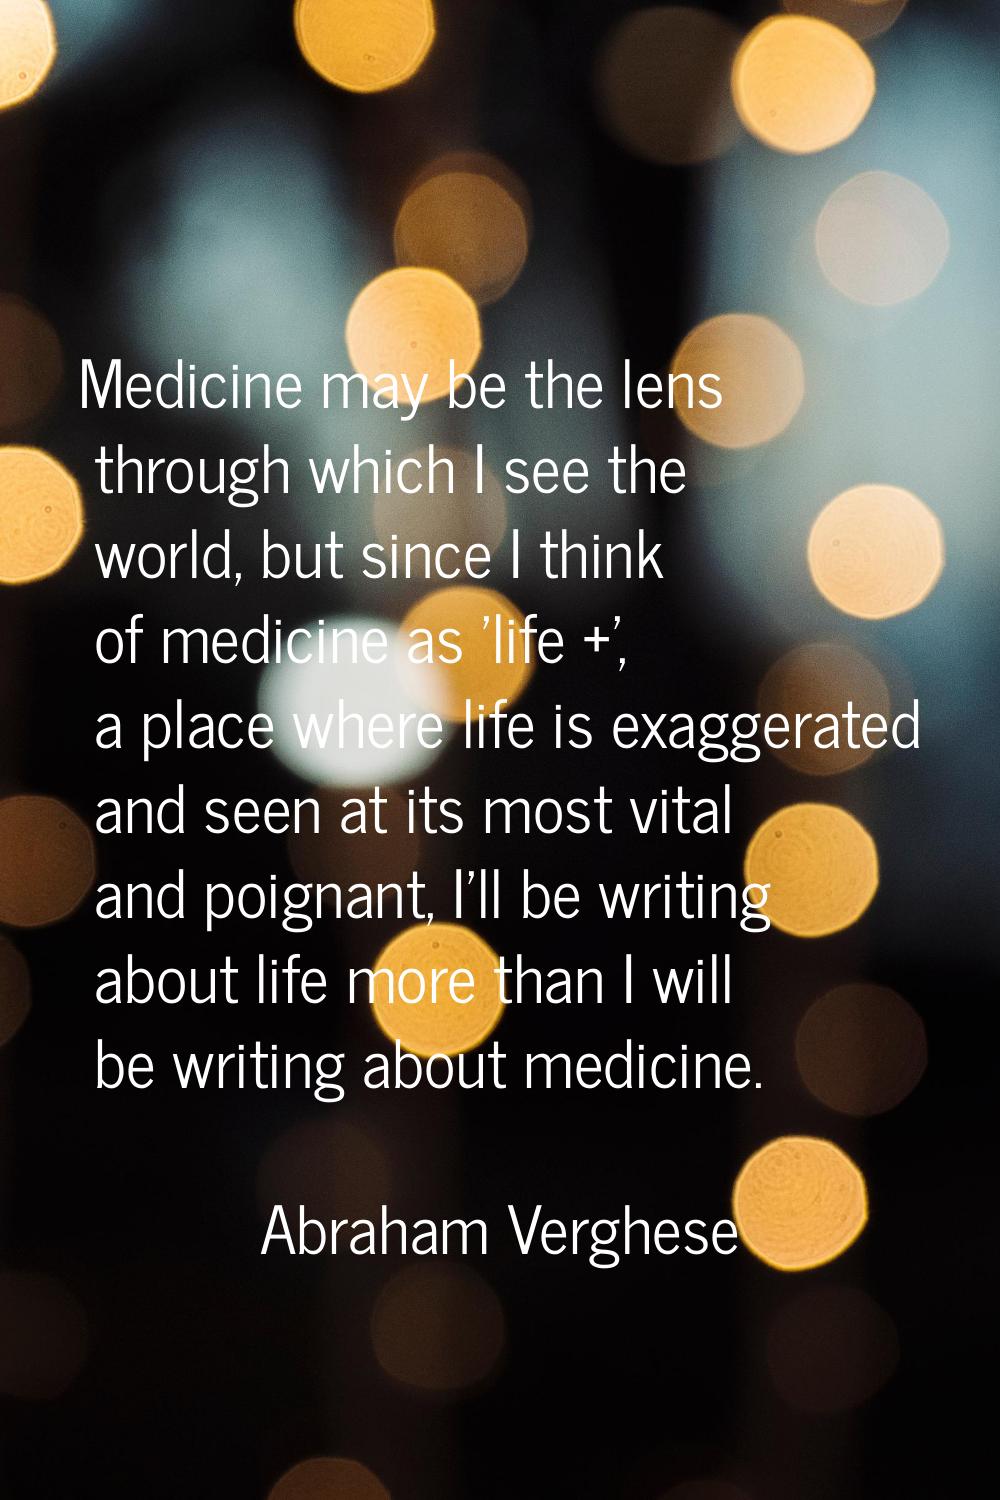 Medicine may be the lens through which I see the world, but since I think of medicine as 'life +', 